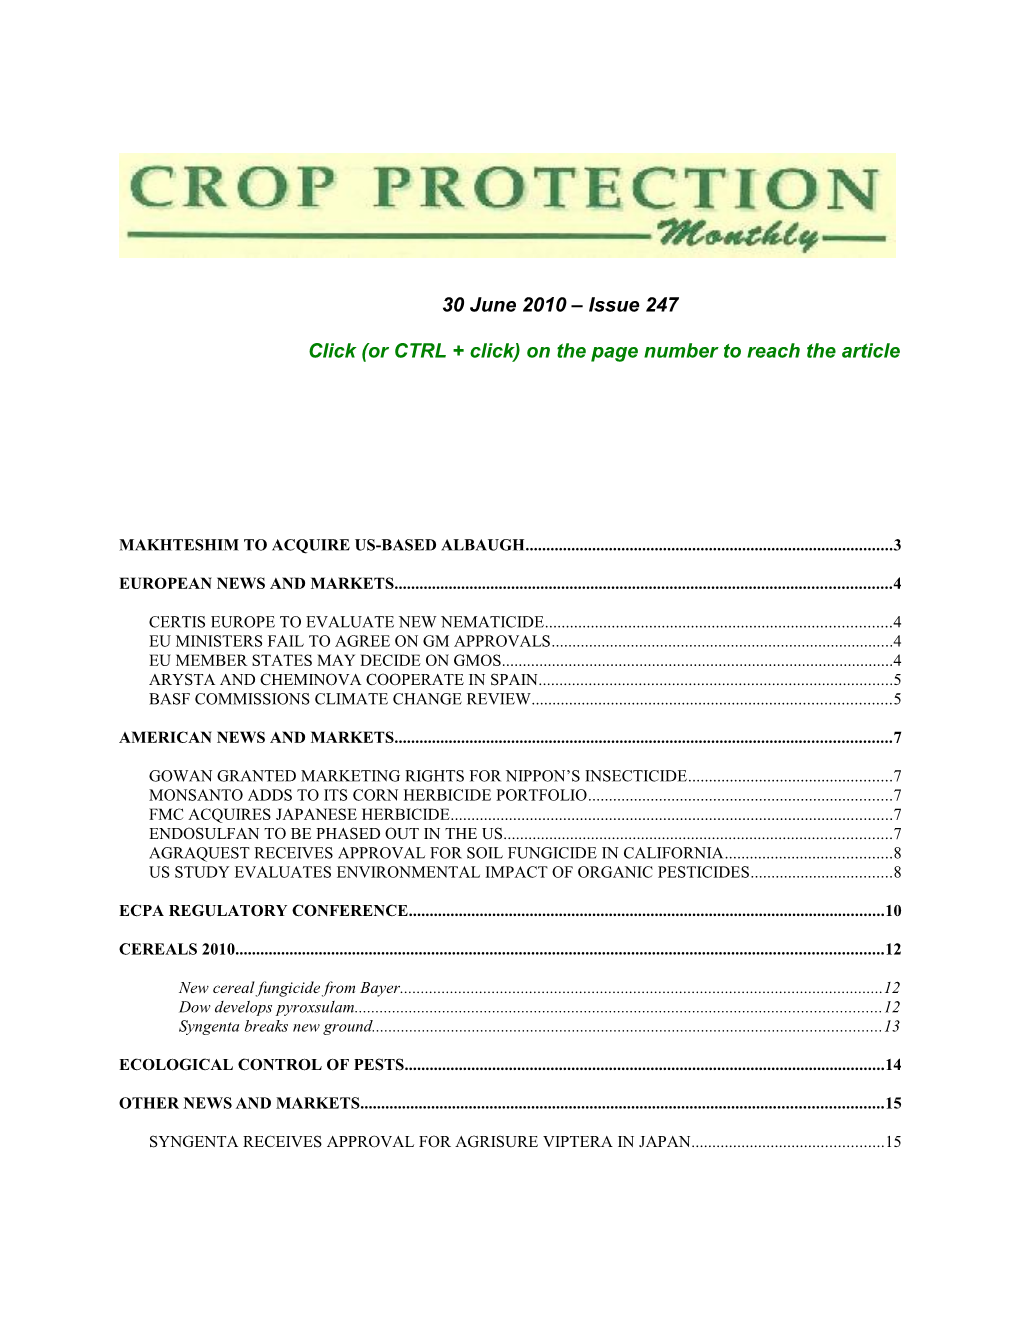 Gowan Company Has Been Granted the US Crop Protection Marketing Rights for the Insecticide